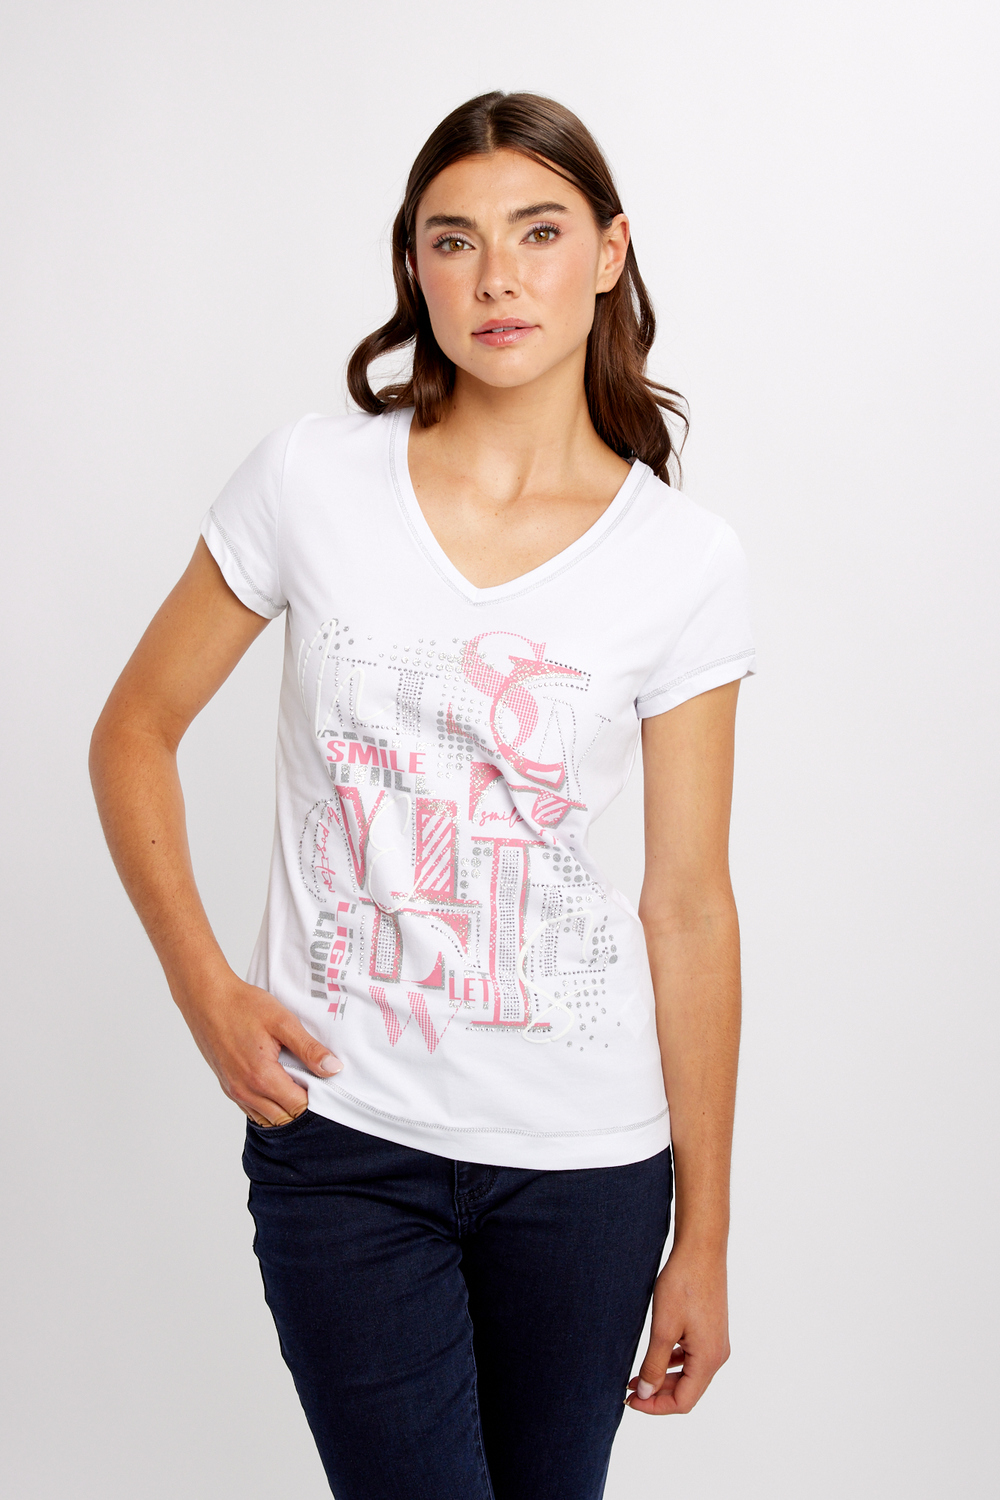 Text-Print T-Shirt Style 24160. White/coral